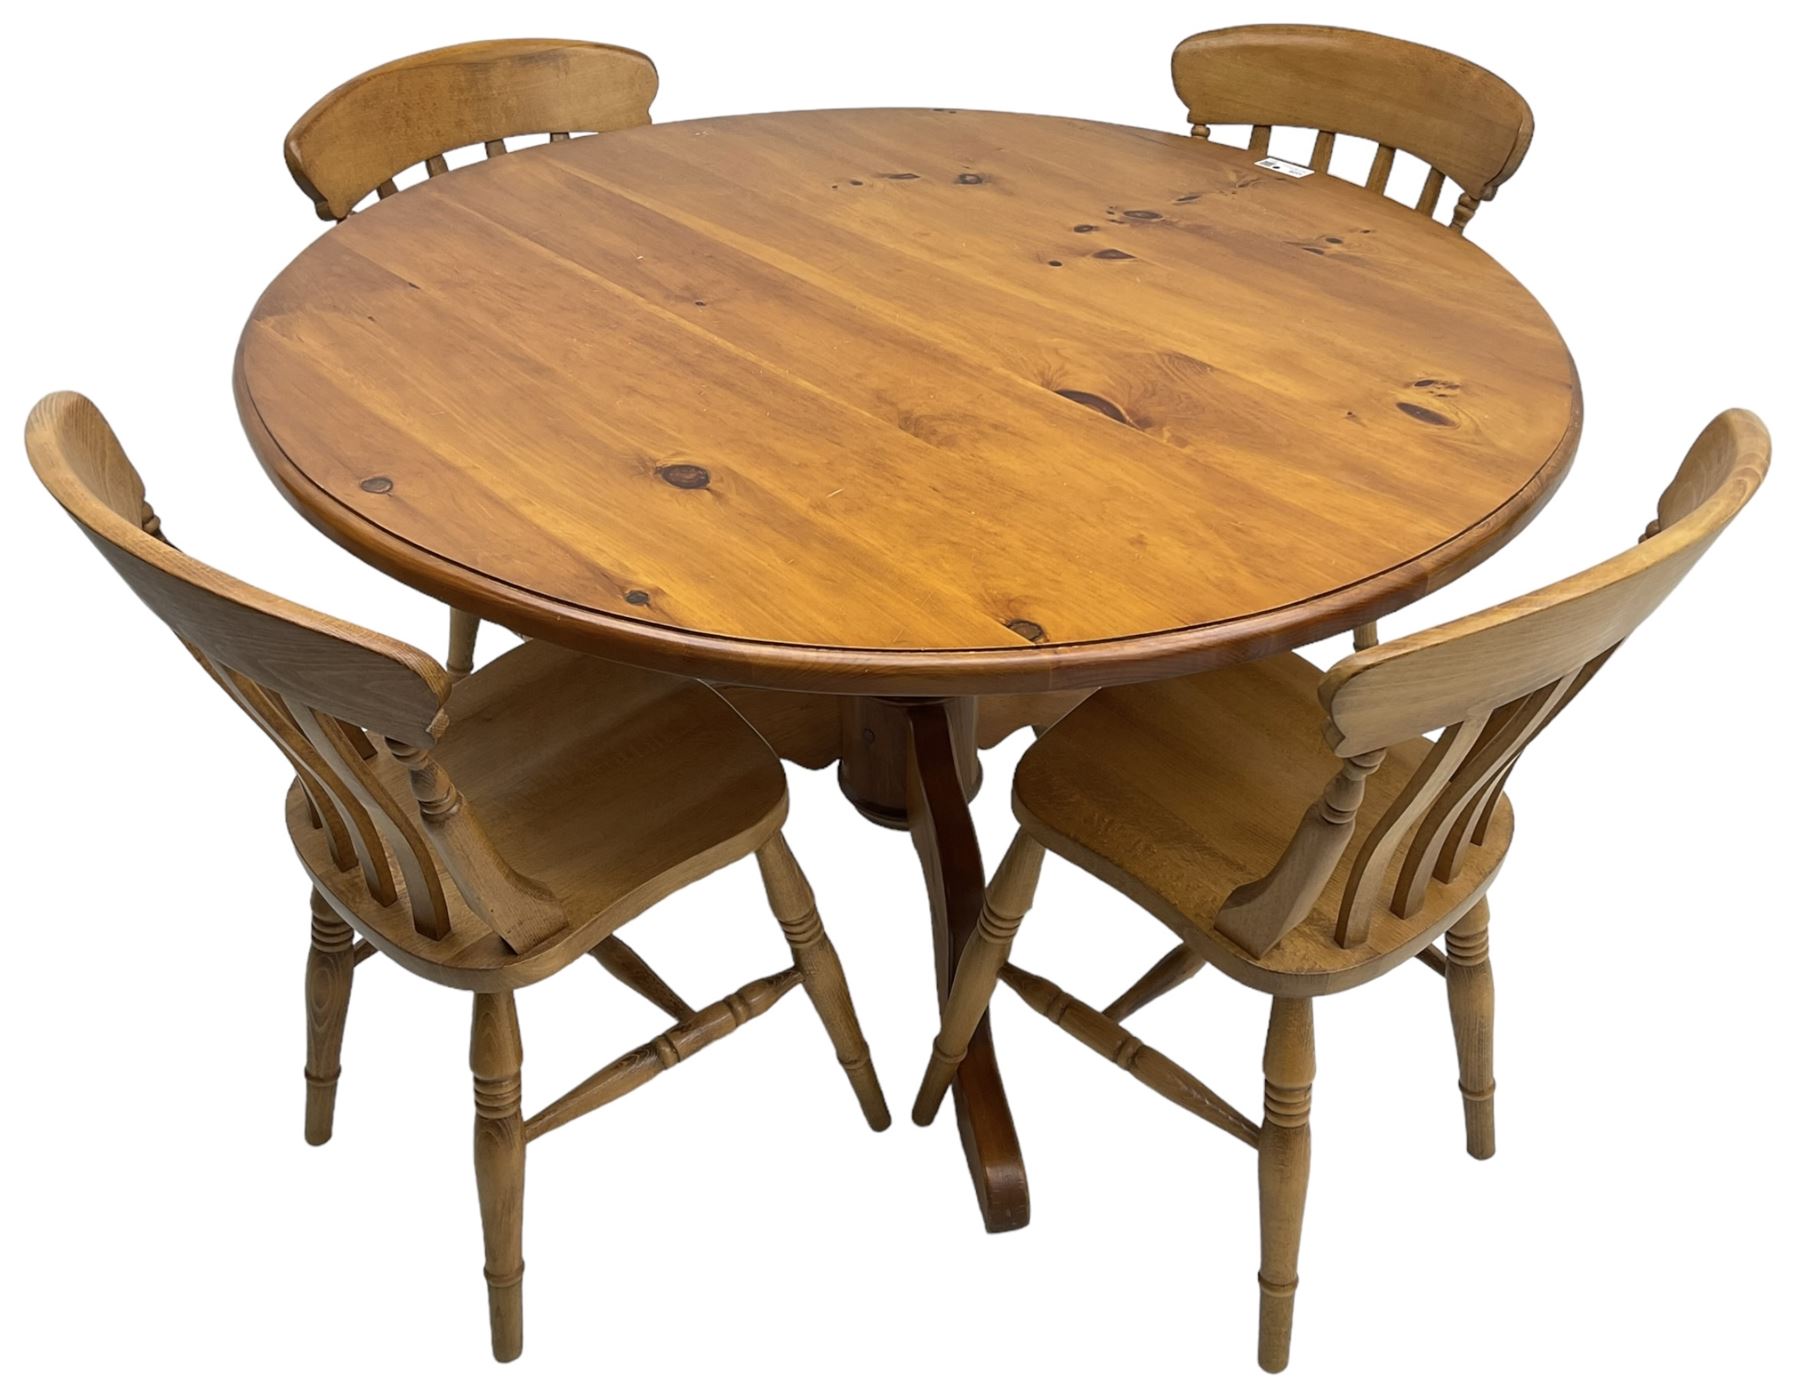 Waxed pine circular pedestal dining table (D122cm - Image 6 of 6